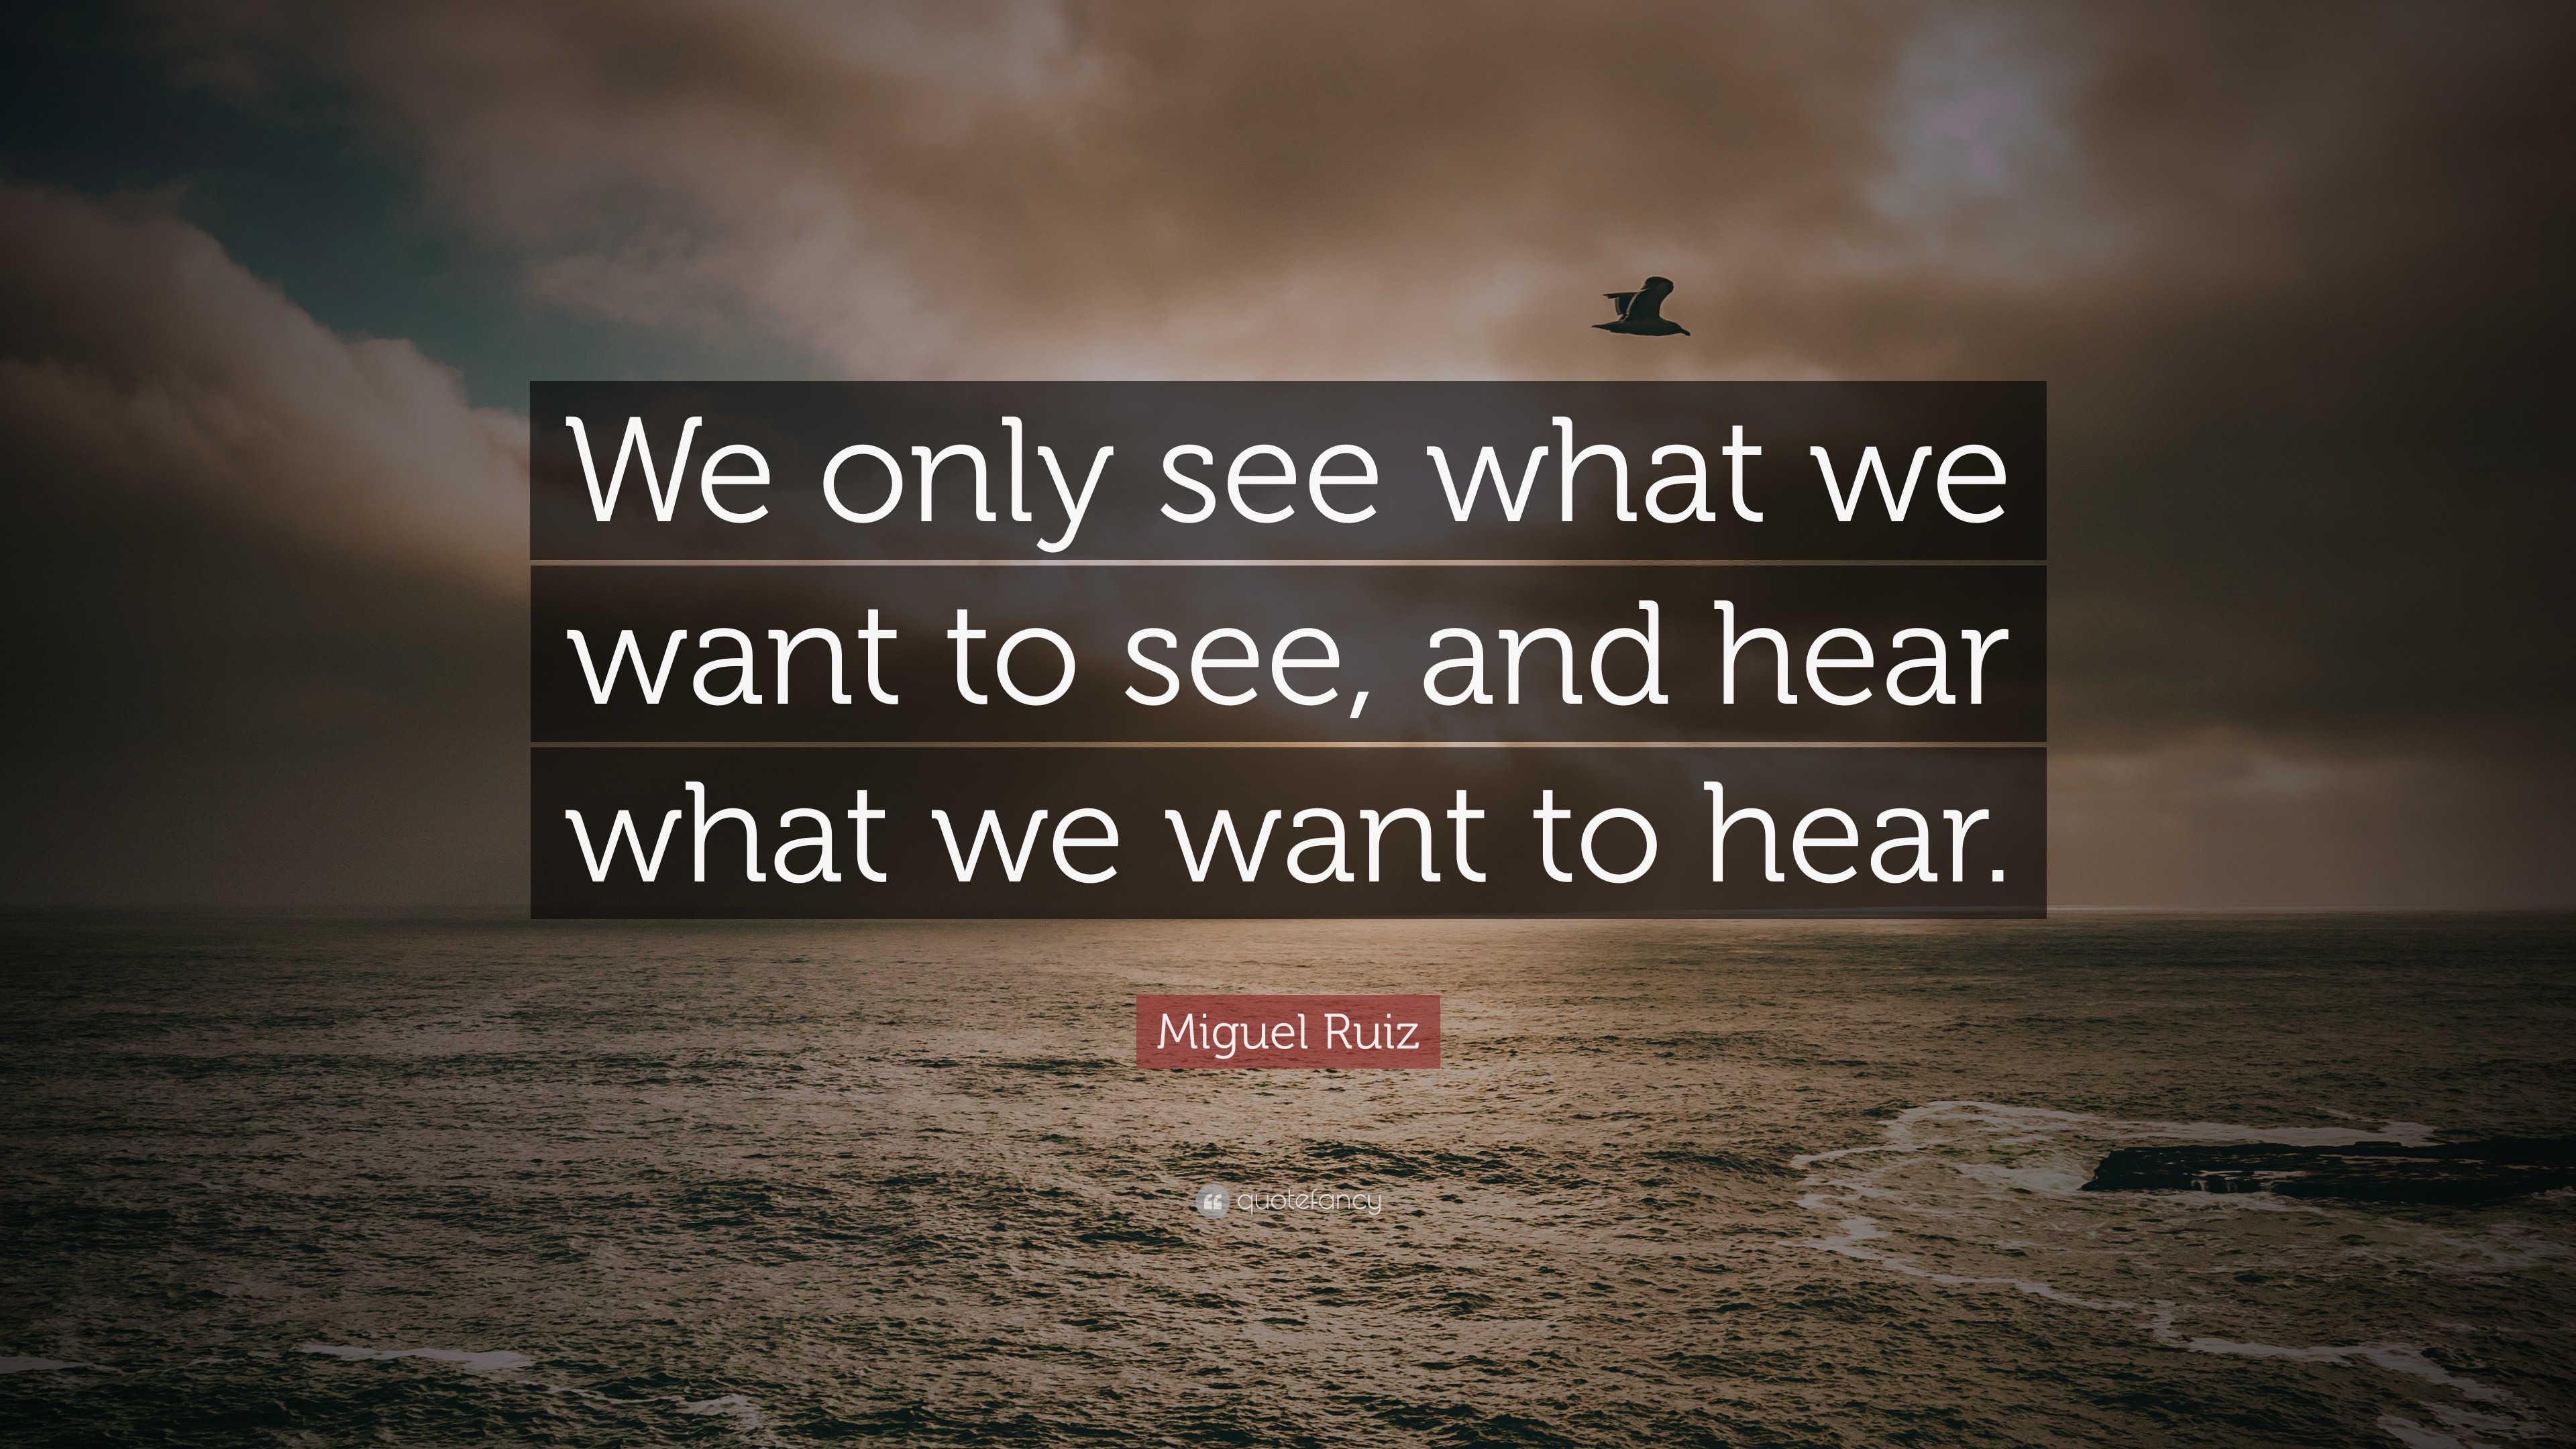 Miguel Ruiz Quote: "We only see what we want to see, and hear what we want to hear." (11 ...